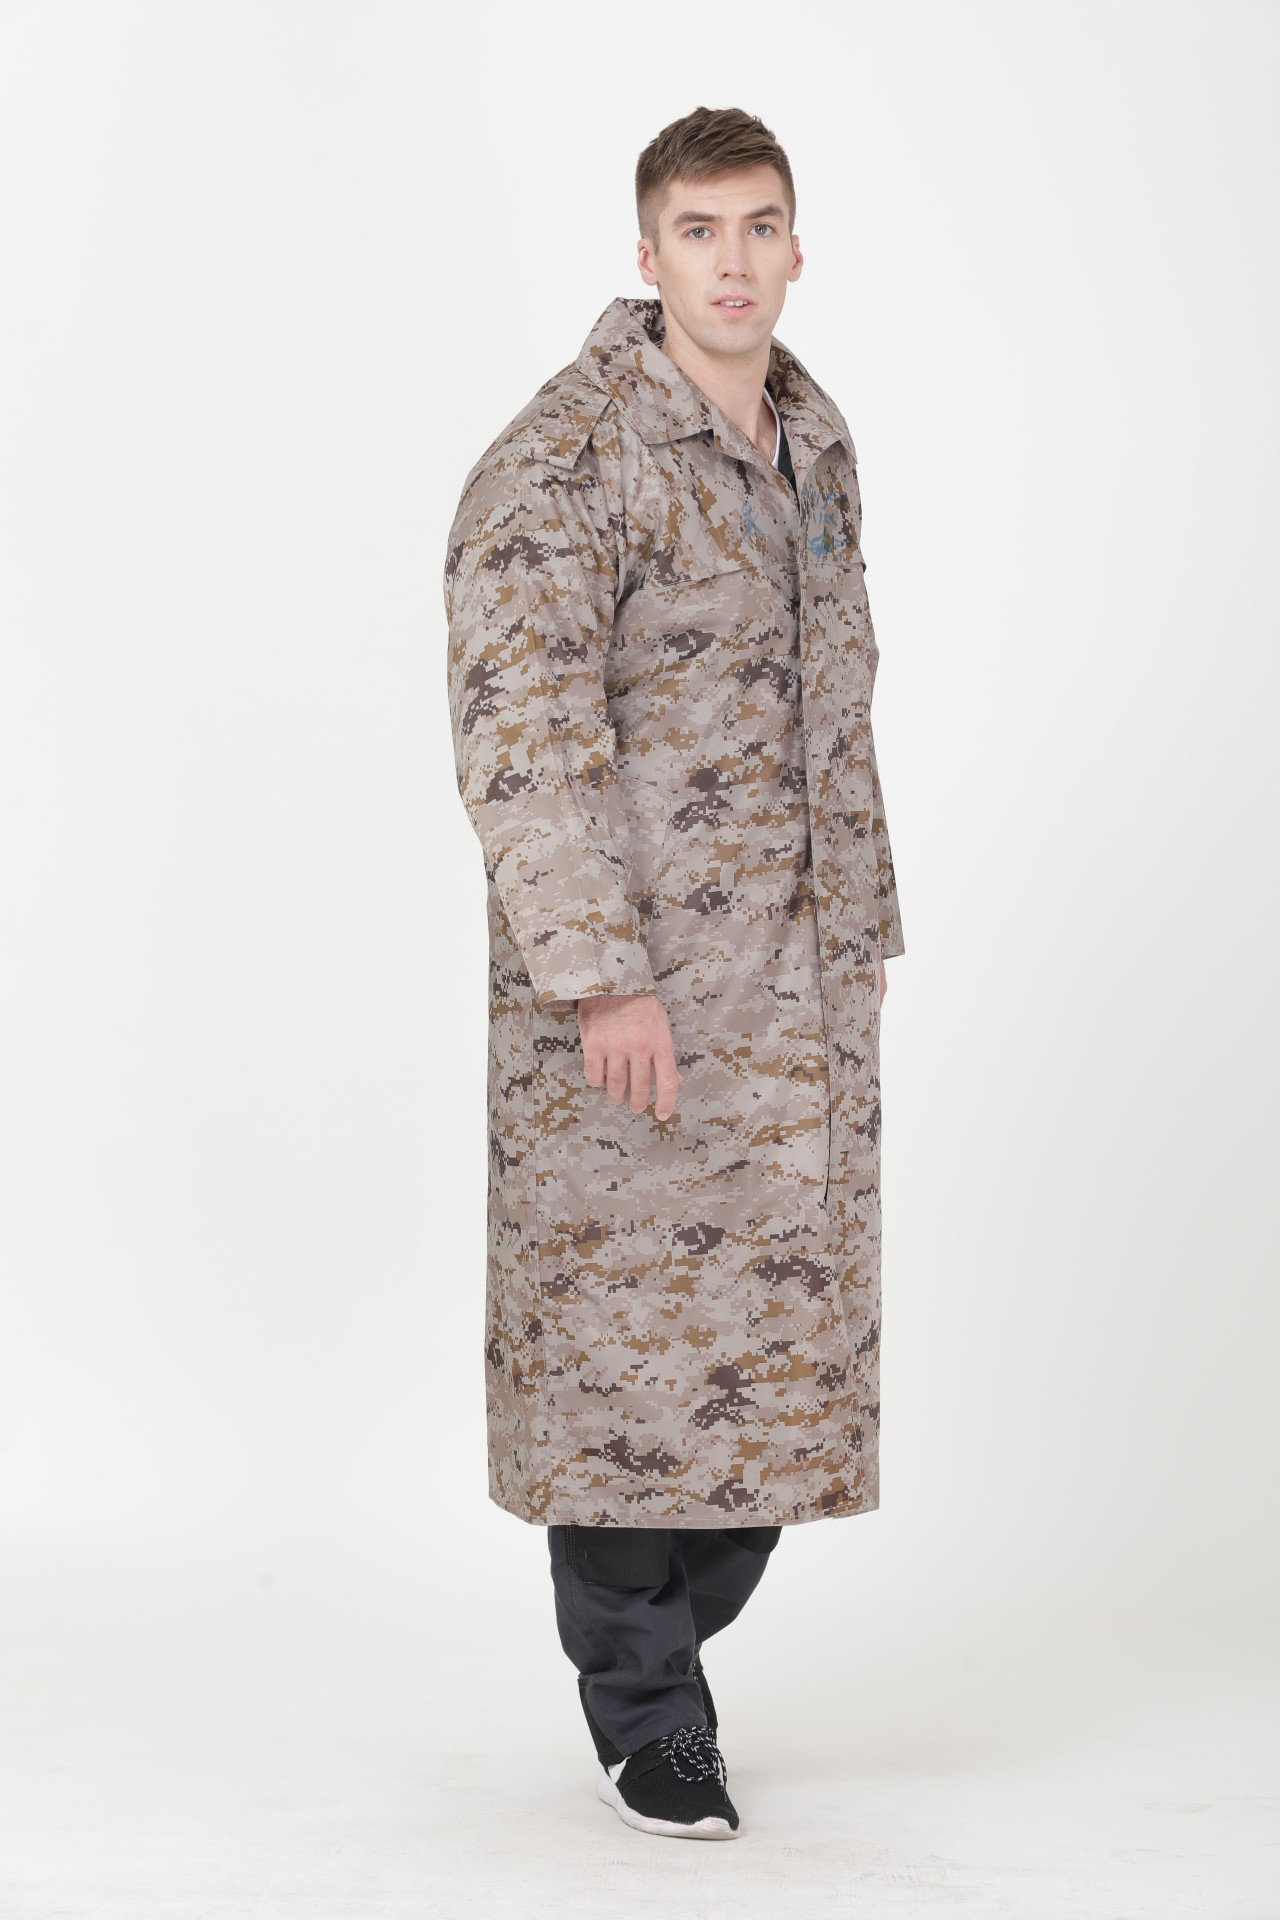  Waterproof Work Clothes Mens Long Raincoat With Hood / Lining Camouflage Printed Manufactures